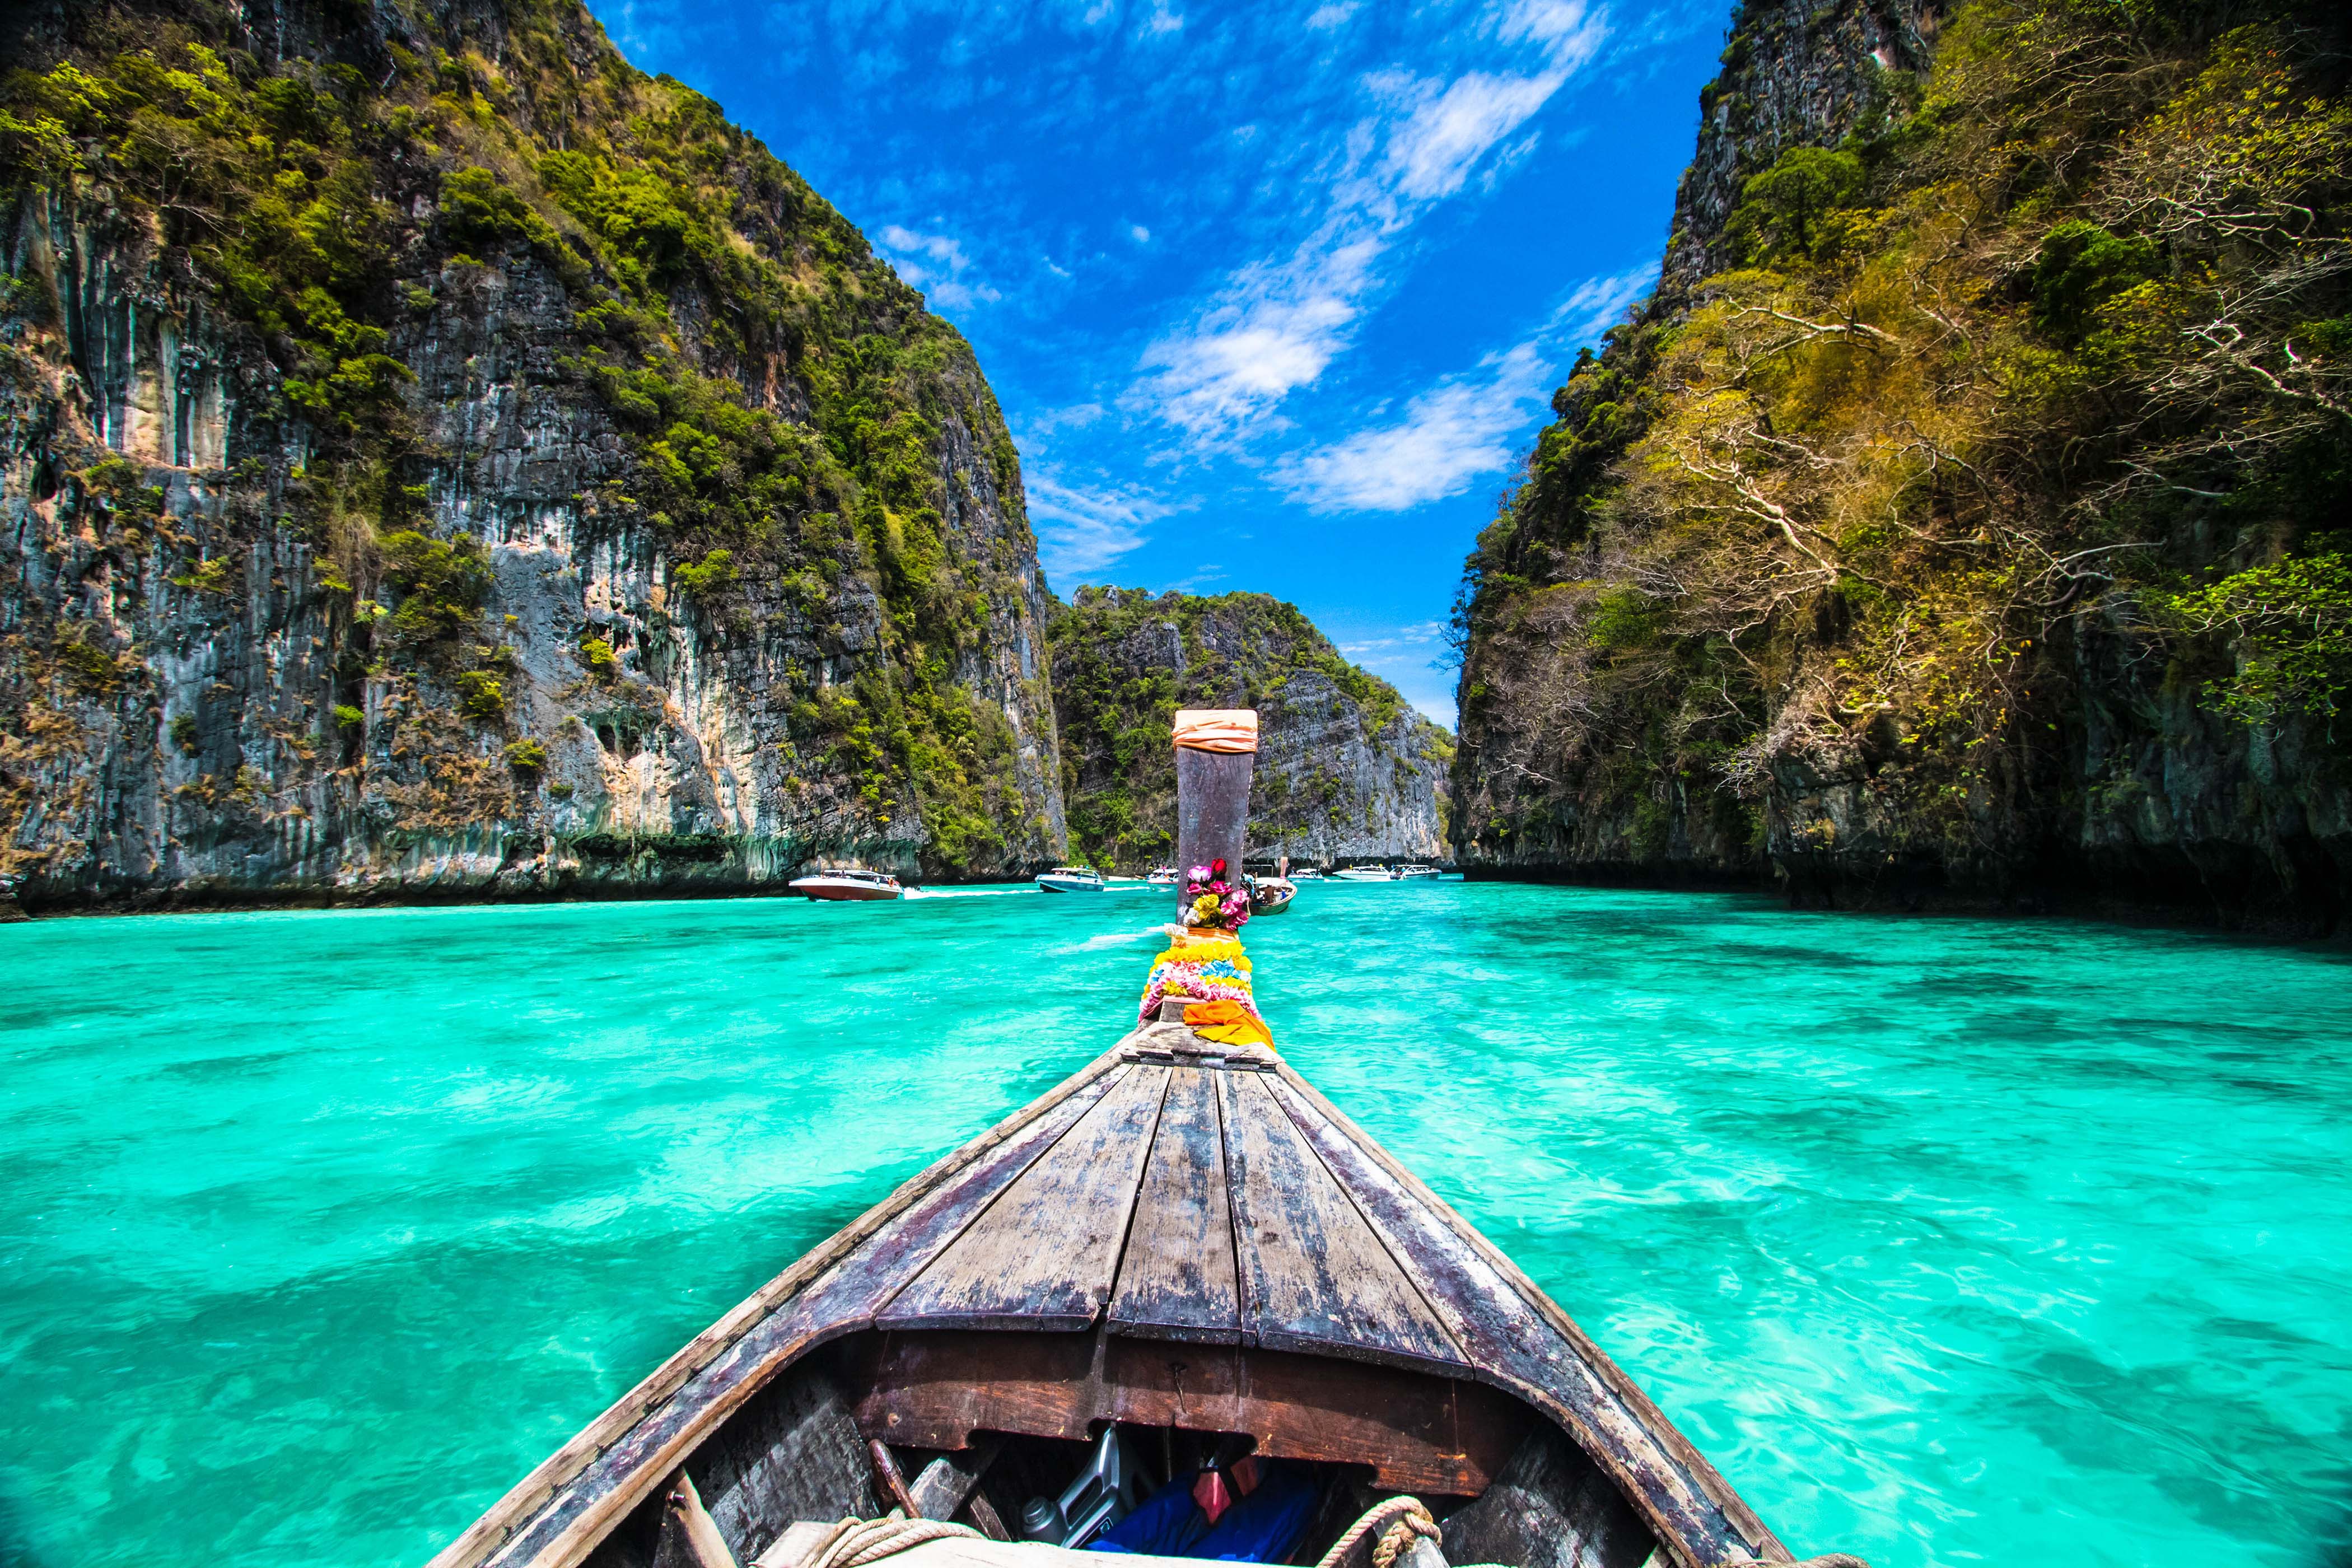 Traditional wooden boat in a picture perfect tropical bay on Koh Phi Phi Island, Thailand, Asia.